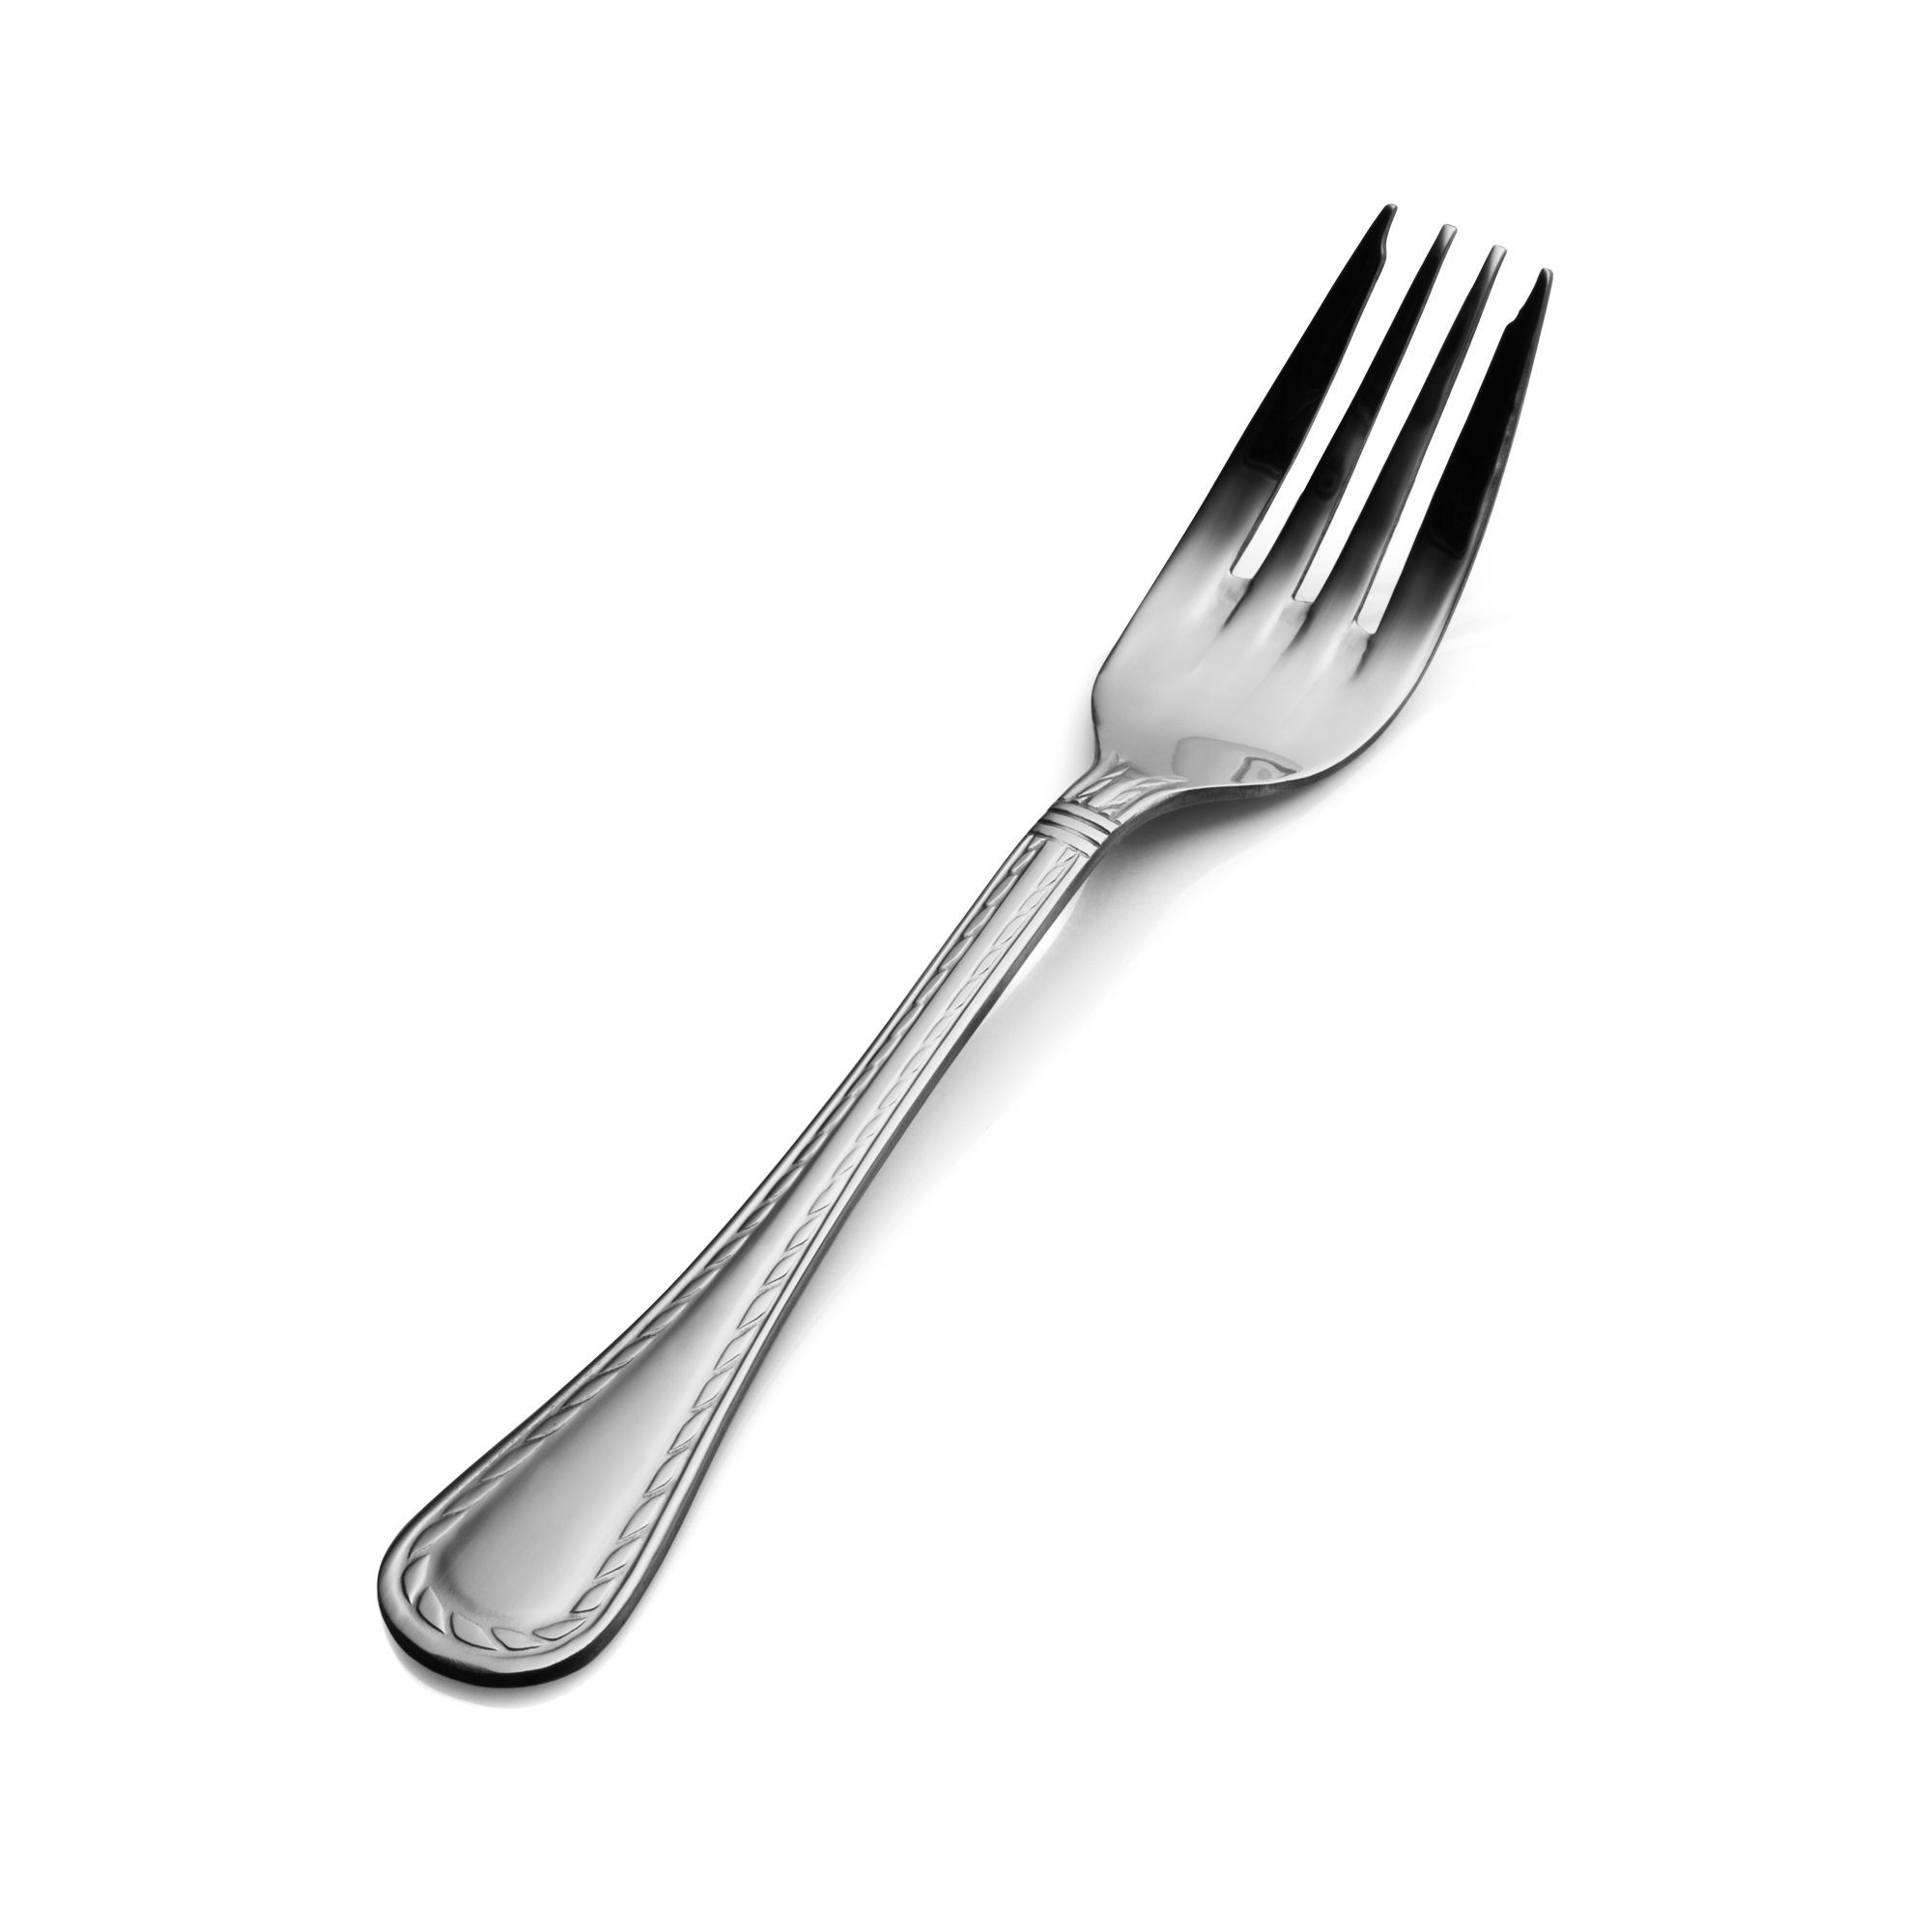 Bon Chef S407 Amore 18/8 Stainless Steel Salad and Dessert Fork